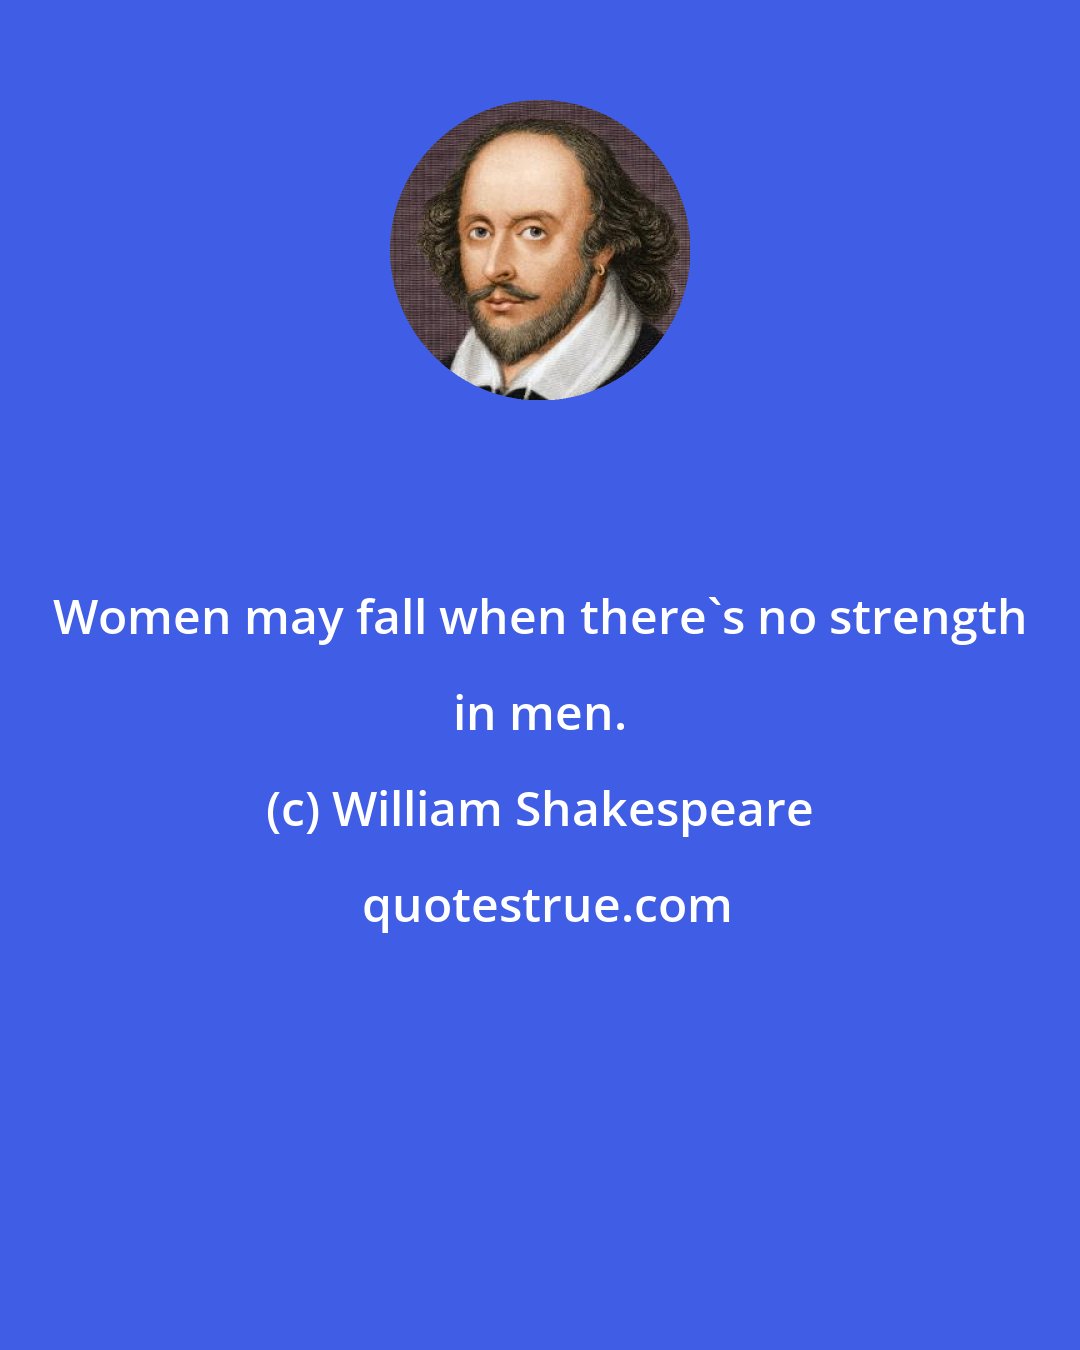 William Shakespeare: Women may fall when there's no strength in men.